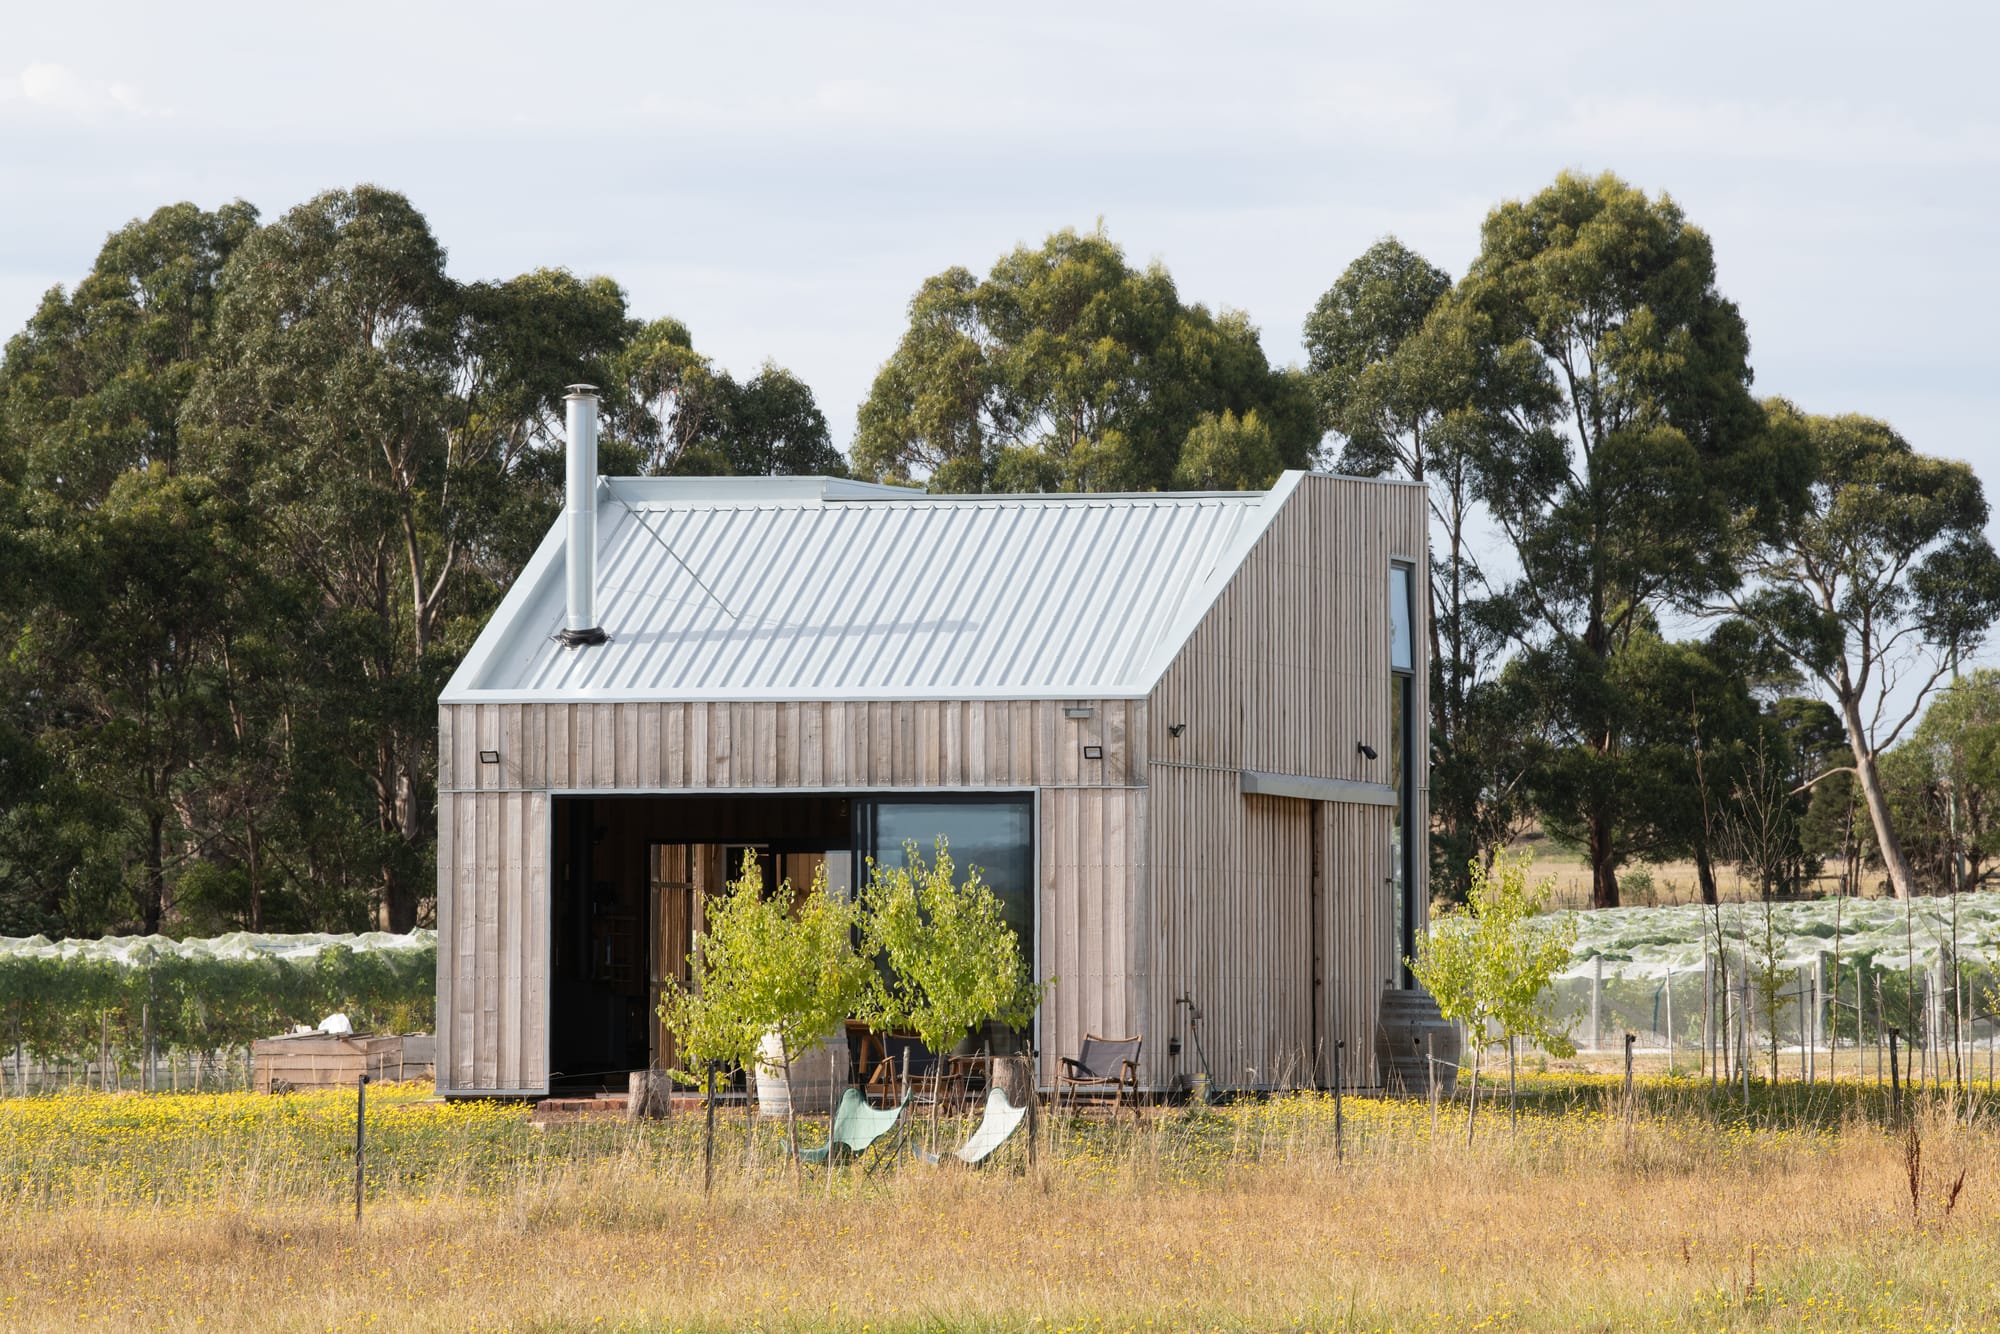 Tasmanian Timber Series: Westella Vineyard. winery building at Westella Vineyard set against a backdrop of Tasmanian countryside, featuring a gabled, corrugated metal roof and weathered timber walls amidst rows of grapevines.